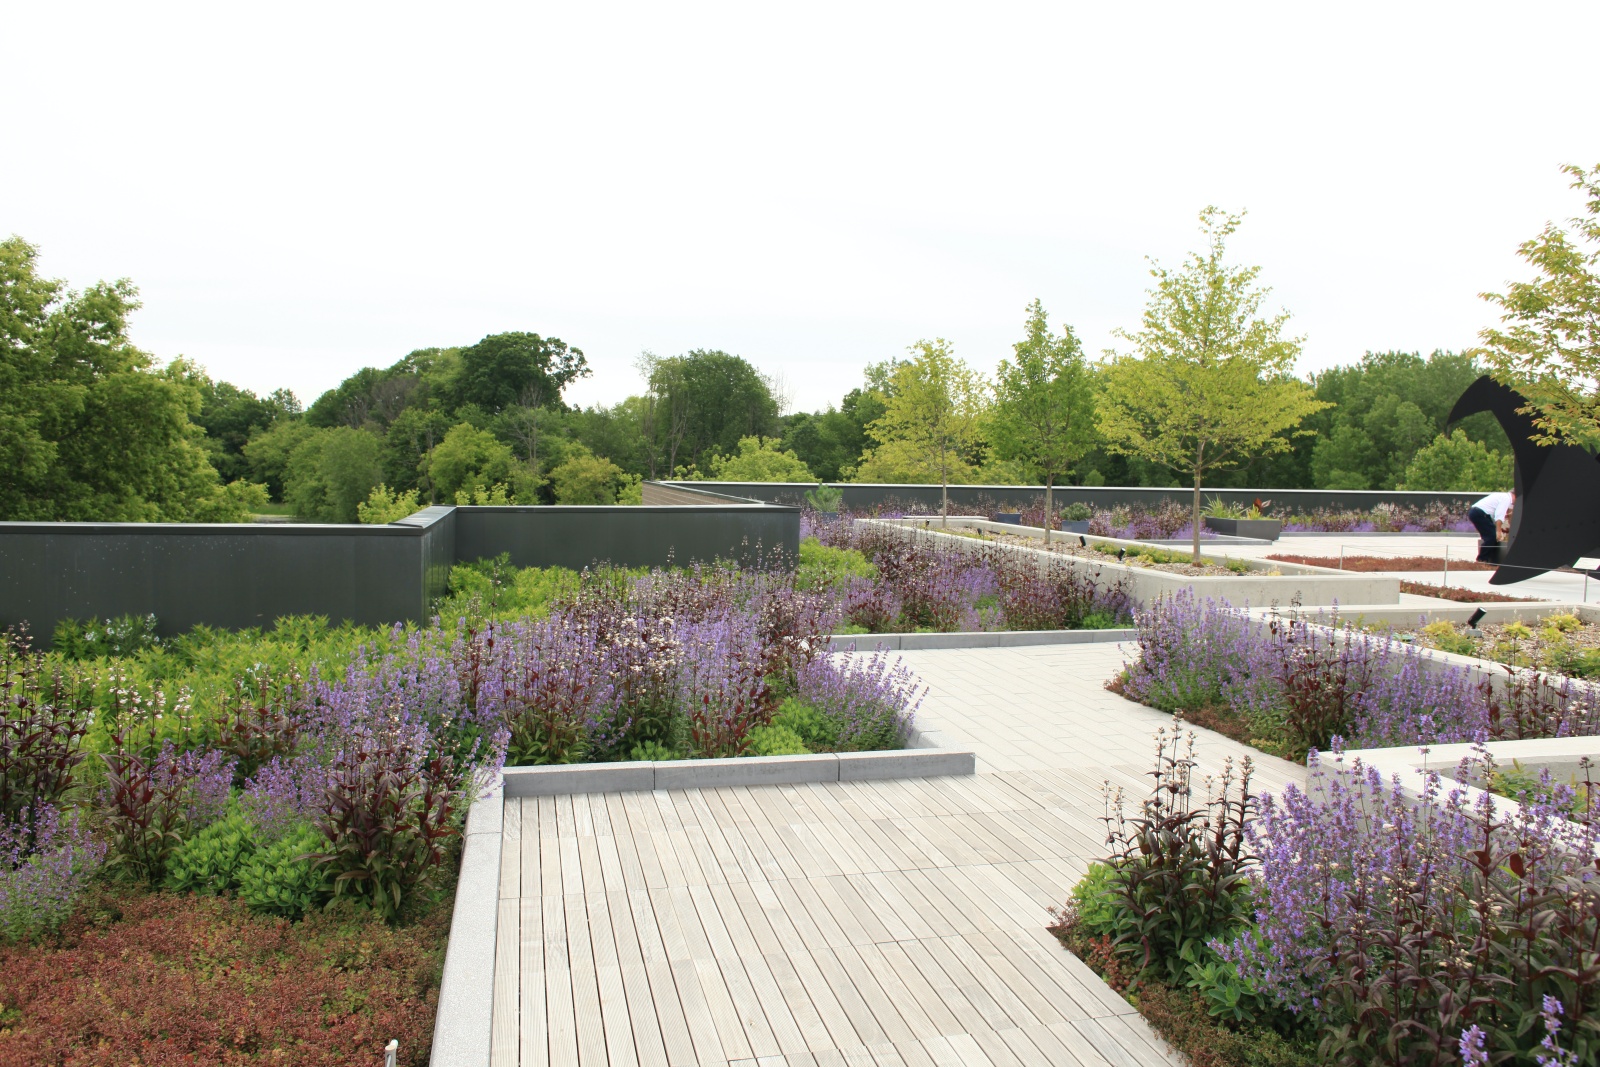 Why Do You Think #Greenroofs Are Important?